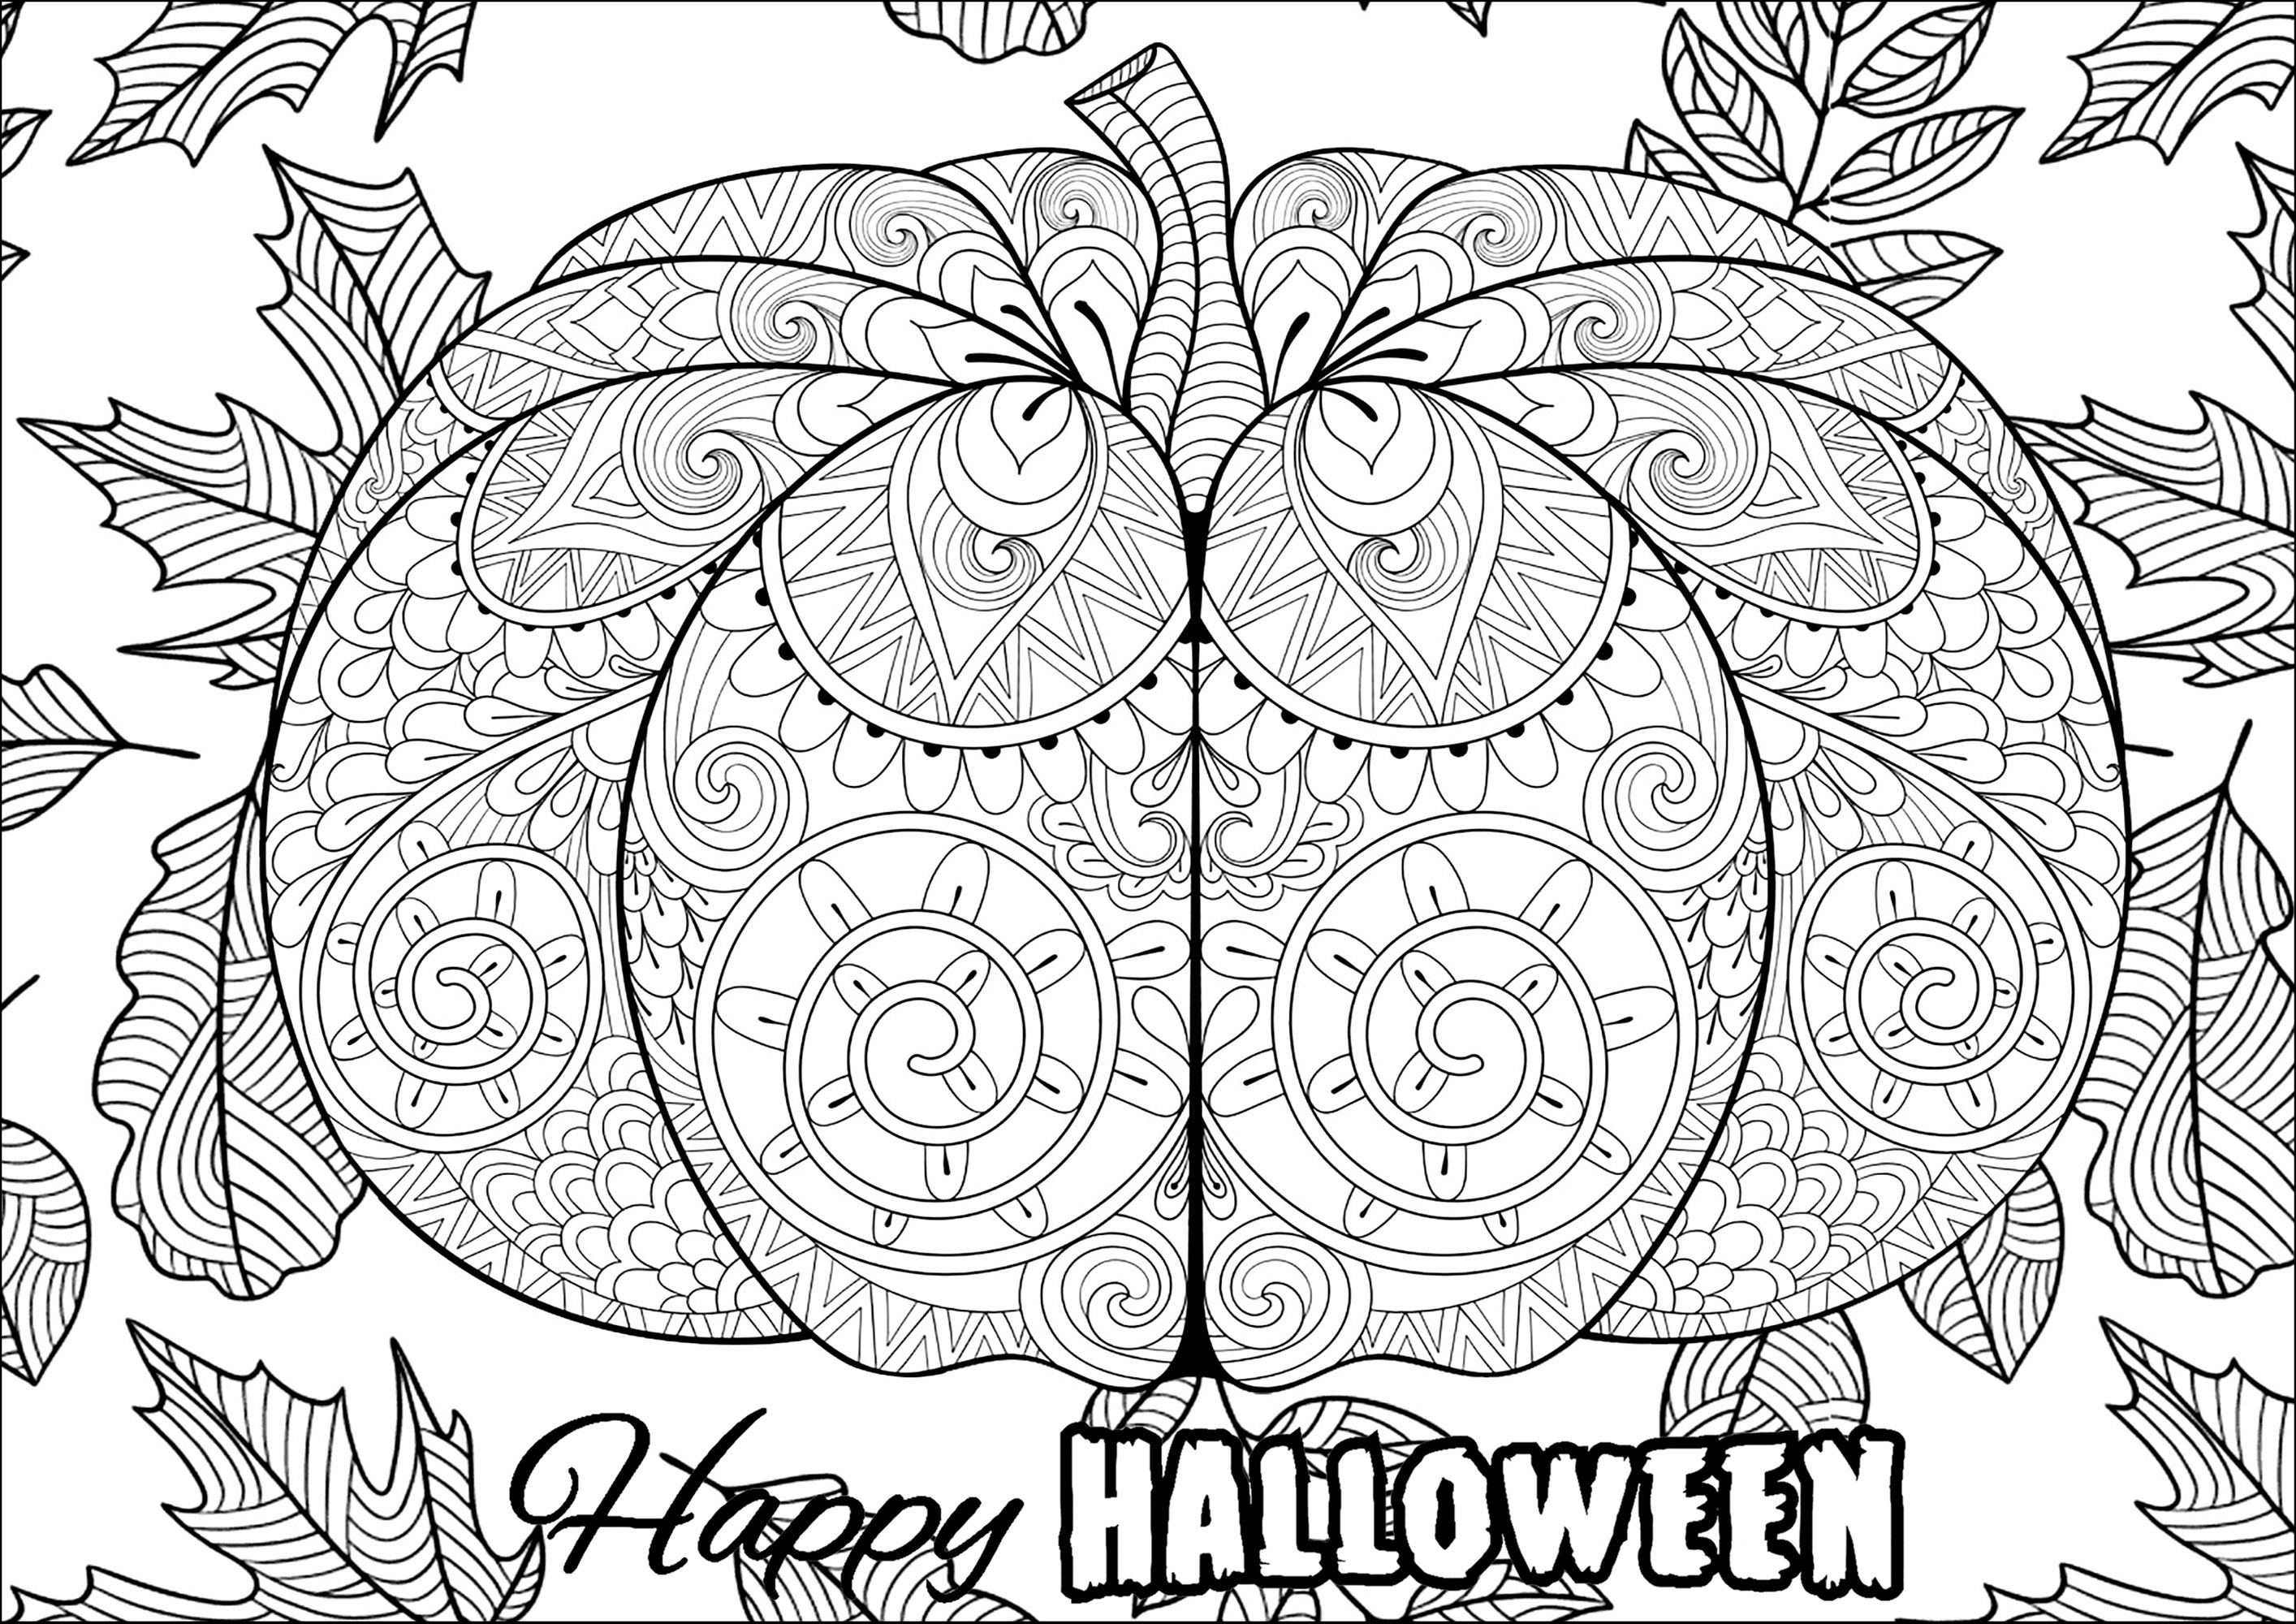 Large Halloween pumpkin with motifs and leaves. Many patterns to color, Source : 123rf   Artist : Ipanki